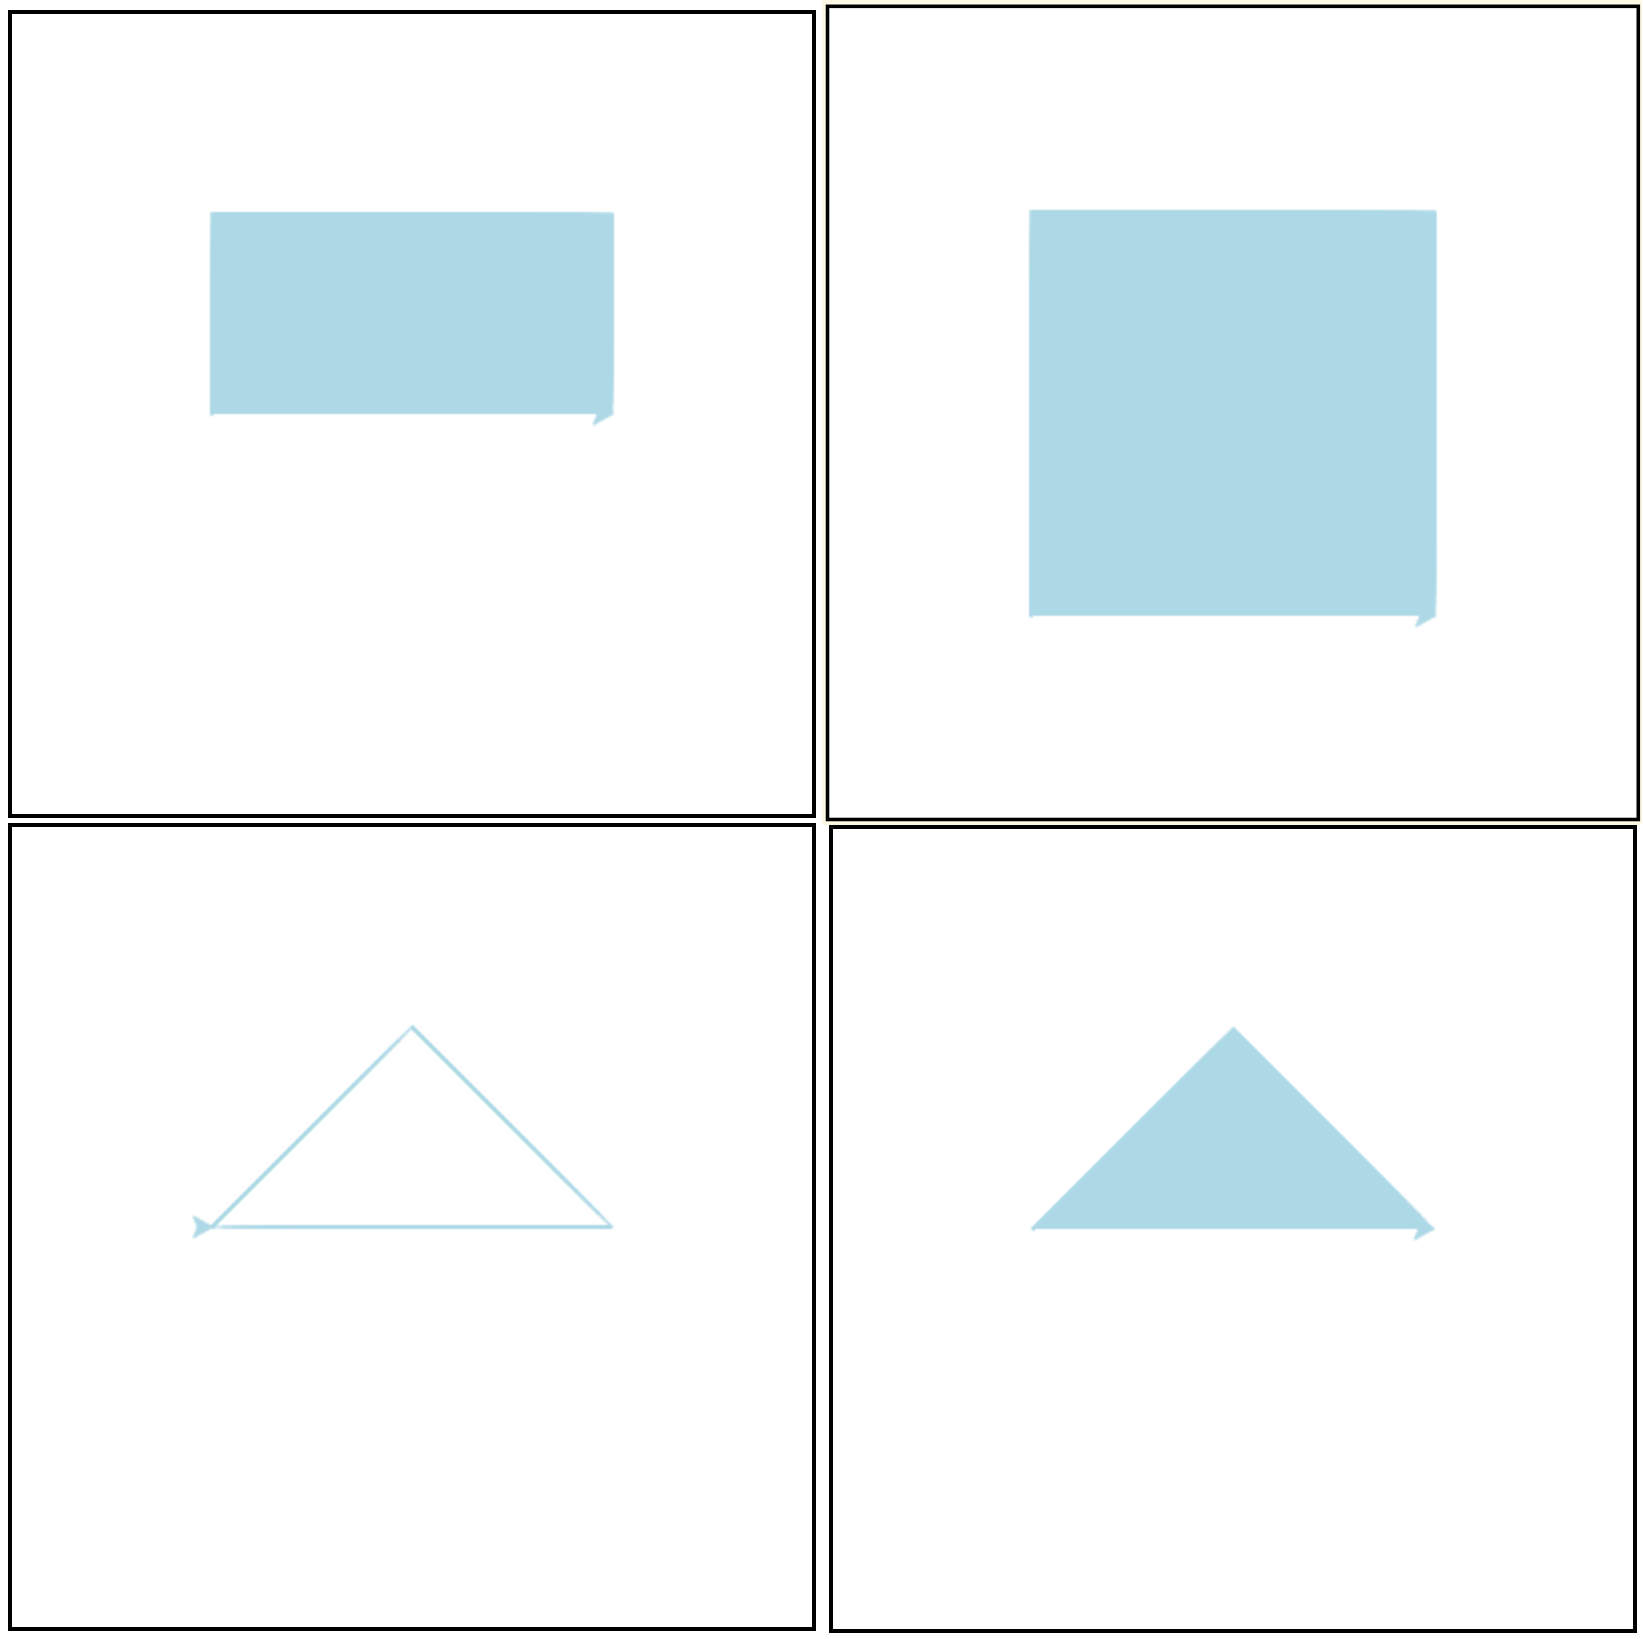 four shapes, all 200 pxls wide by 100 pxls high: top left has a light-blue filled rectangle; top right has a light-blue outlined rectangle; bottom left has a light-blue outlined isosceles triangle; bottom right has a light-blue filled isosceles triangle